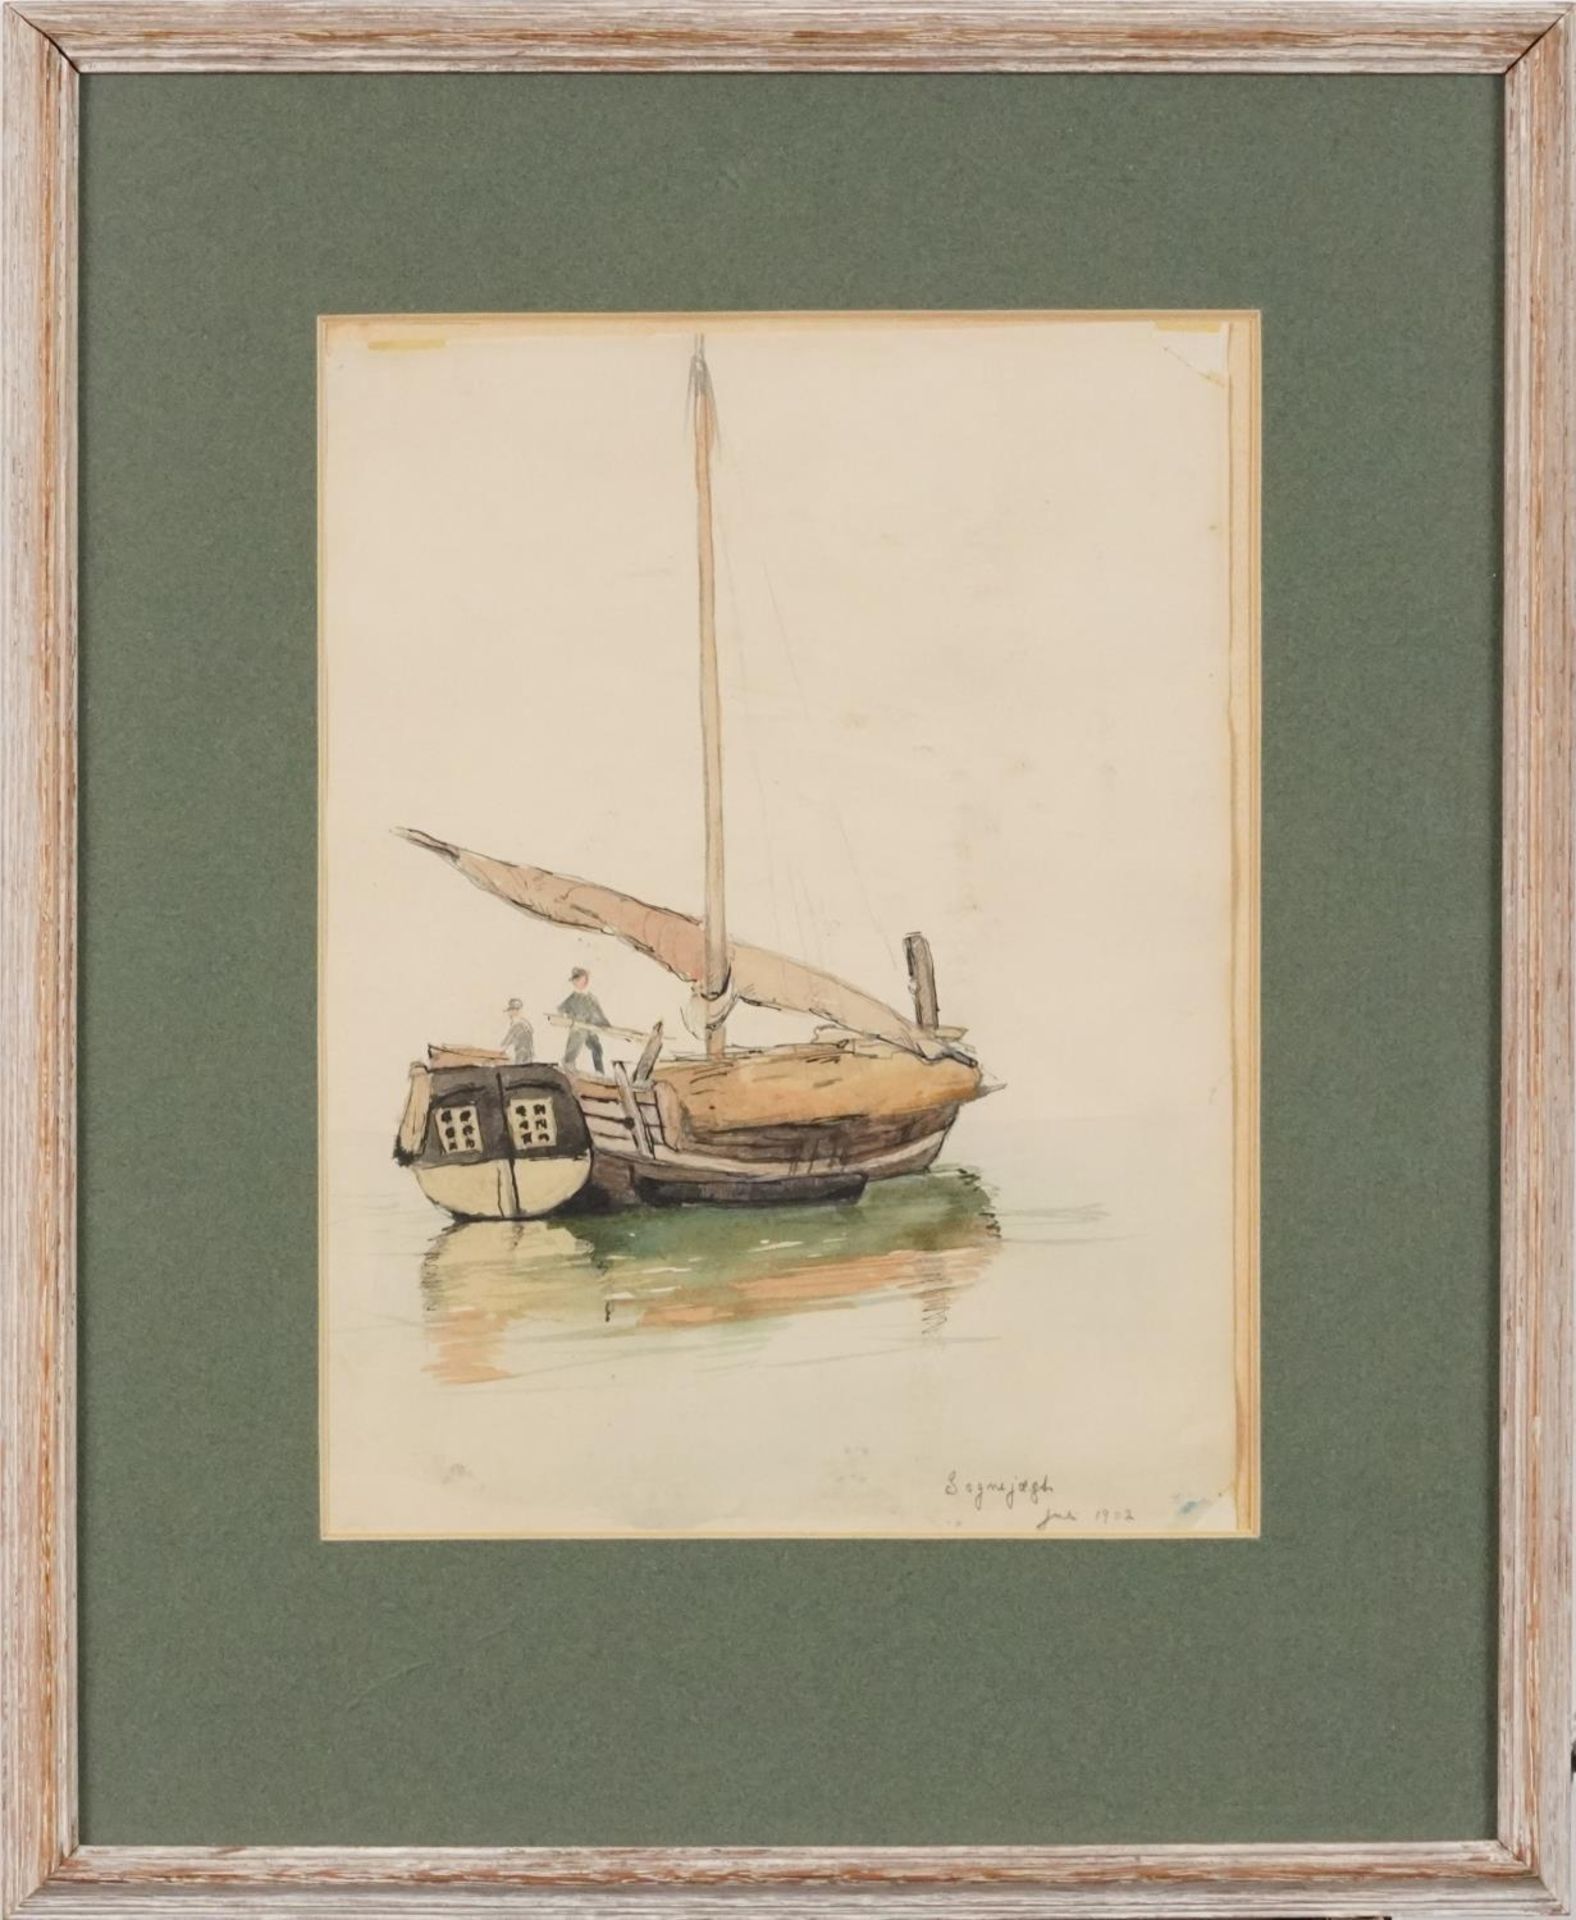 Attributed to Hans Dahl - Fishing boat, early 20th century Norwegian school pencil and - Image 2 of 4